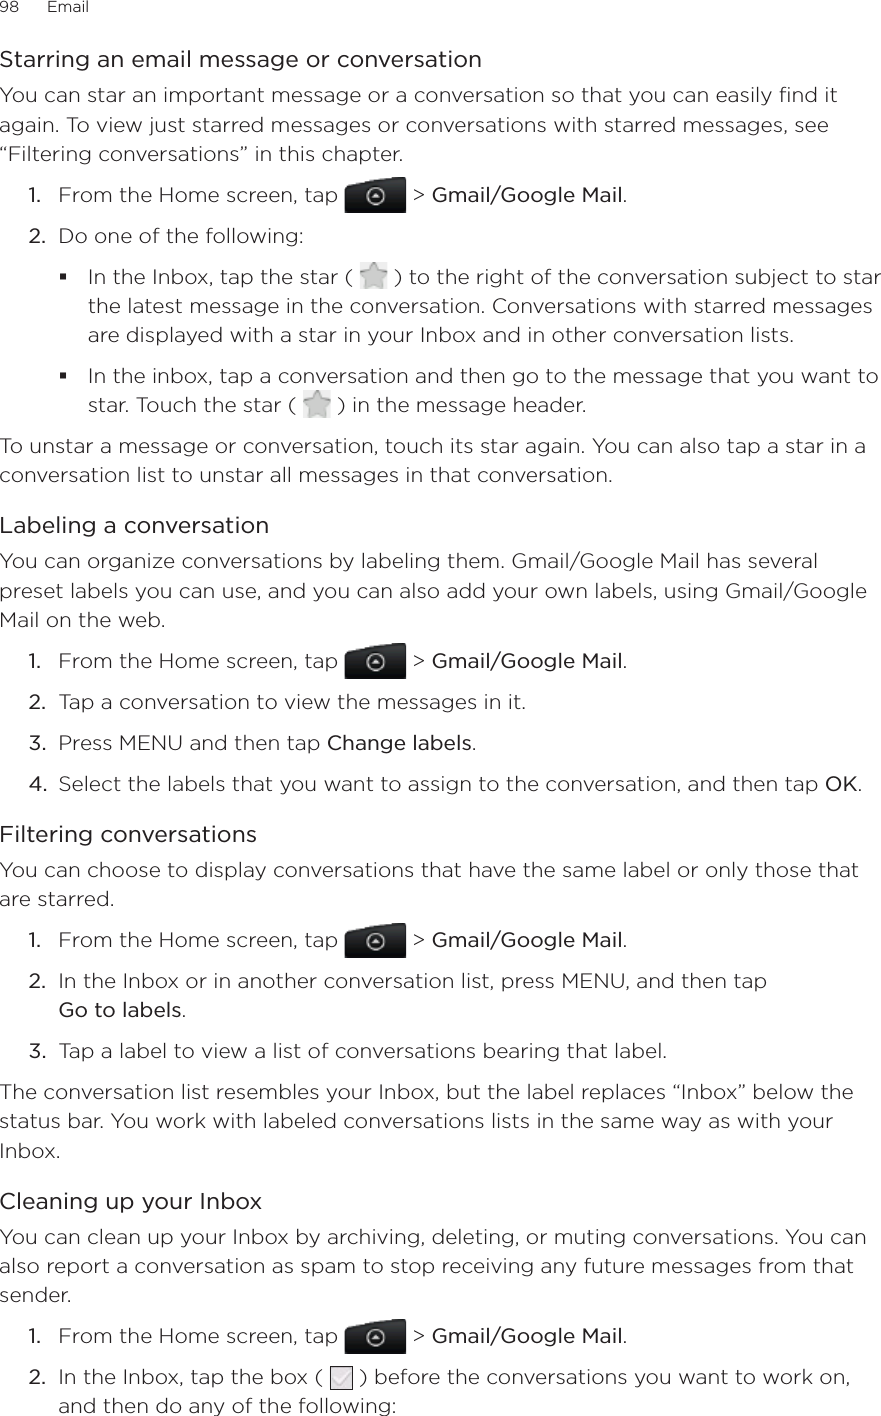 98      Email      Starring an email message or conversationYou can star an important message or a conversation so that you can easily find it again. To view just starred messages or conversations with starred messages, see “Filtering conversations” in this chapter.1.  From the Home screen, tap   &gt; Gmail/Google Mail.2.  Do one of the following:In the Inbox, tap the star (   ) to the right of the conversation subject to star the latest message in the conversation. Conversations with starred messages are displayed with a star in your Inbox and in other conversation lists.In the inbox, tap a conversation and then go to the message that you want to star. Touch the star (   ) in the message header.To unstar a message or conversation, touch its star again. You can also tap a star in a conversation list to unstar all messages in that conversation.Labeling a conversationYou can organize conversations by labeling them. Gmail/Google Mail has several preset labels you can use, and you can also add your own labels, using Gmail/Google Mail on the web.1.  From the Home screen, tap   &gt; Gmail/Google Mail.2.  Tap a conversation to view the messages in it.3.  Press MENU and then tap Change labels.4.  Select the labels that you want to assign to the conversation, and then tap OK.Filtering conversationsYou can choose to display conversations that have the same label or only those that are starred.1.  From the Home screen, tap   &gt; Gmail/Google Mail.2.  In the Inbox or in another conversation list, press MENU, and then tap  Go to labels.3.  Tap a label to view a list of conversations bearing that label.The conversation list resembles your Inbox, but the label replaces “Inbox” below the status bar. You work with labeled conversations lists in the same way as with your Inbox.Cleaning up your InboxYou can clean up your Inbox by archiving, deleting, or muting conversations. You can also report a conversation as spam to stop receiving any future messages from that sender.1.  From the Home screen, tap   &gt; Gmail/Google Mail.2.  In the Inbox, tap the box (   ) before the conversations you want to work on, and then do any of the following: